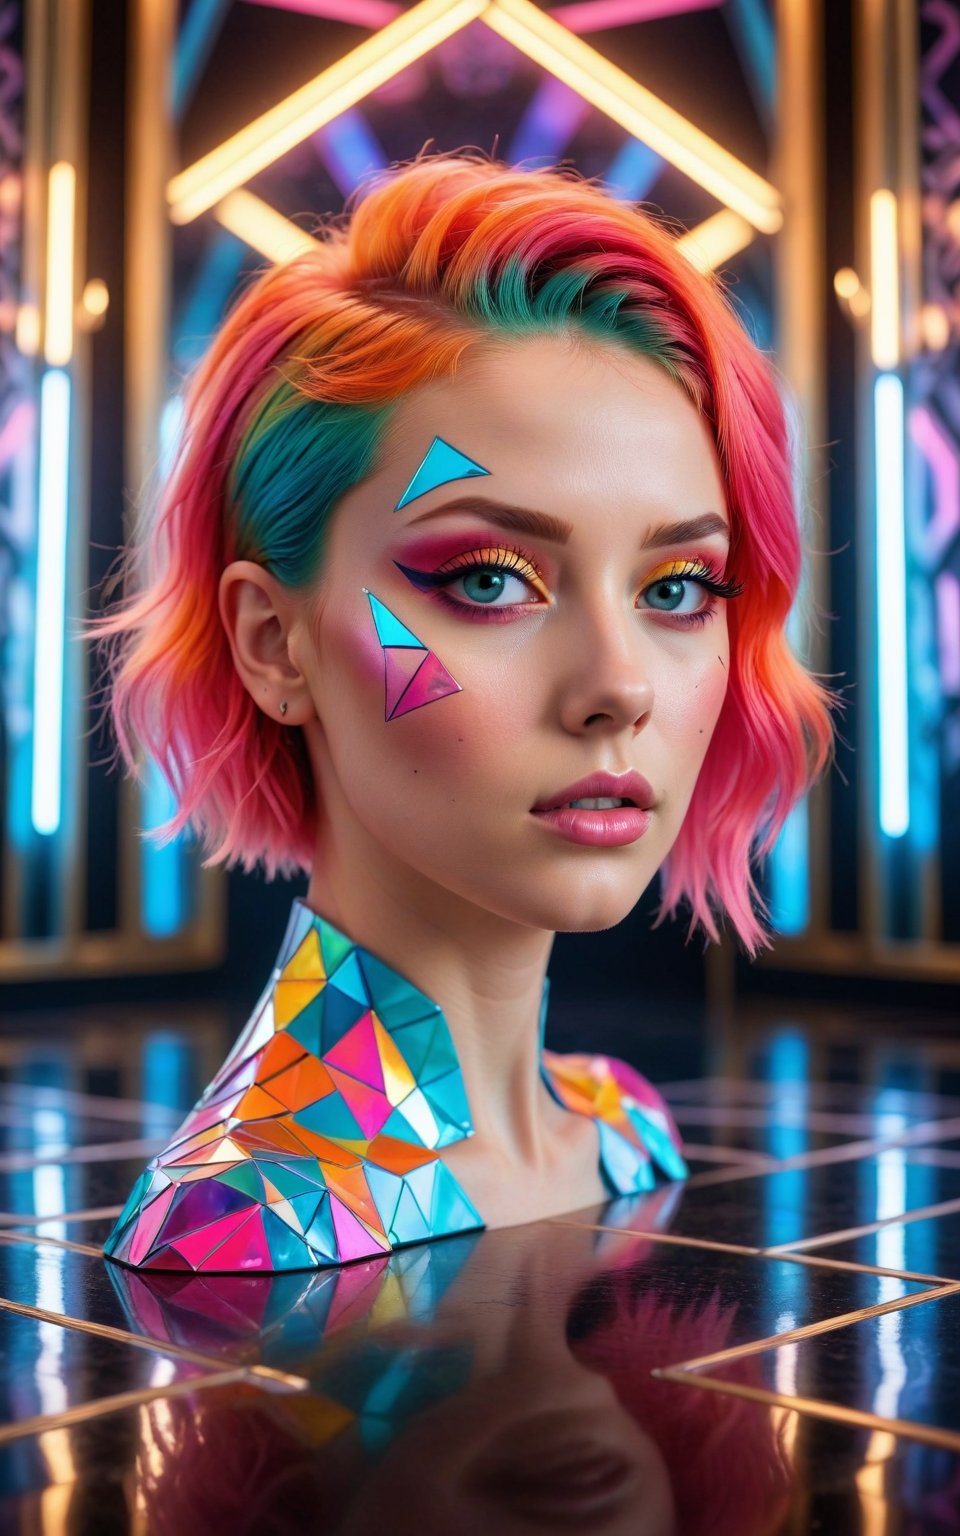 (best quality, 4K, 8K, high-resolution, masterpiece), ultra-detailed, photorealistic, young woman, vibrant neon hair, geometric Art Deco patterns on face, surreal dream-like setting, mirror-like floors, mirror-like walls, reflections, posing, intricate facial designs, modern fashion, ethereal lighting, digital art